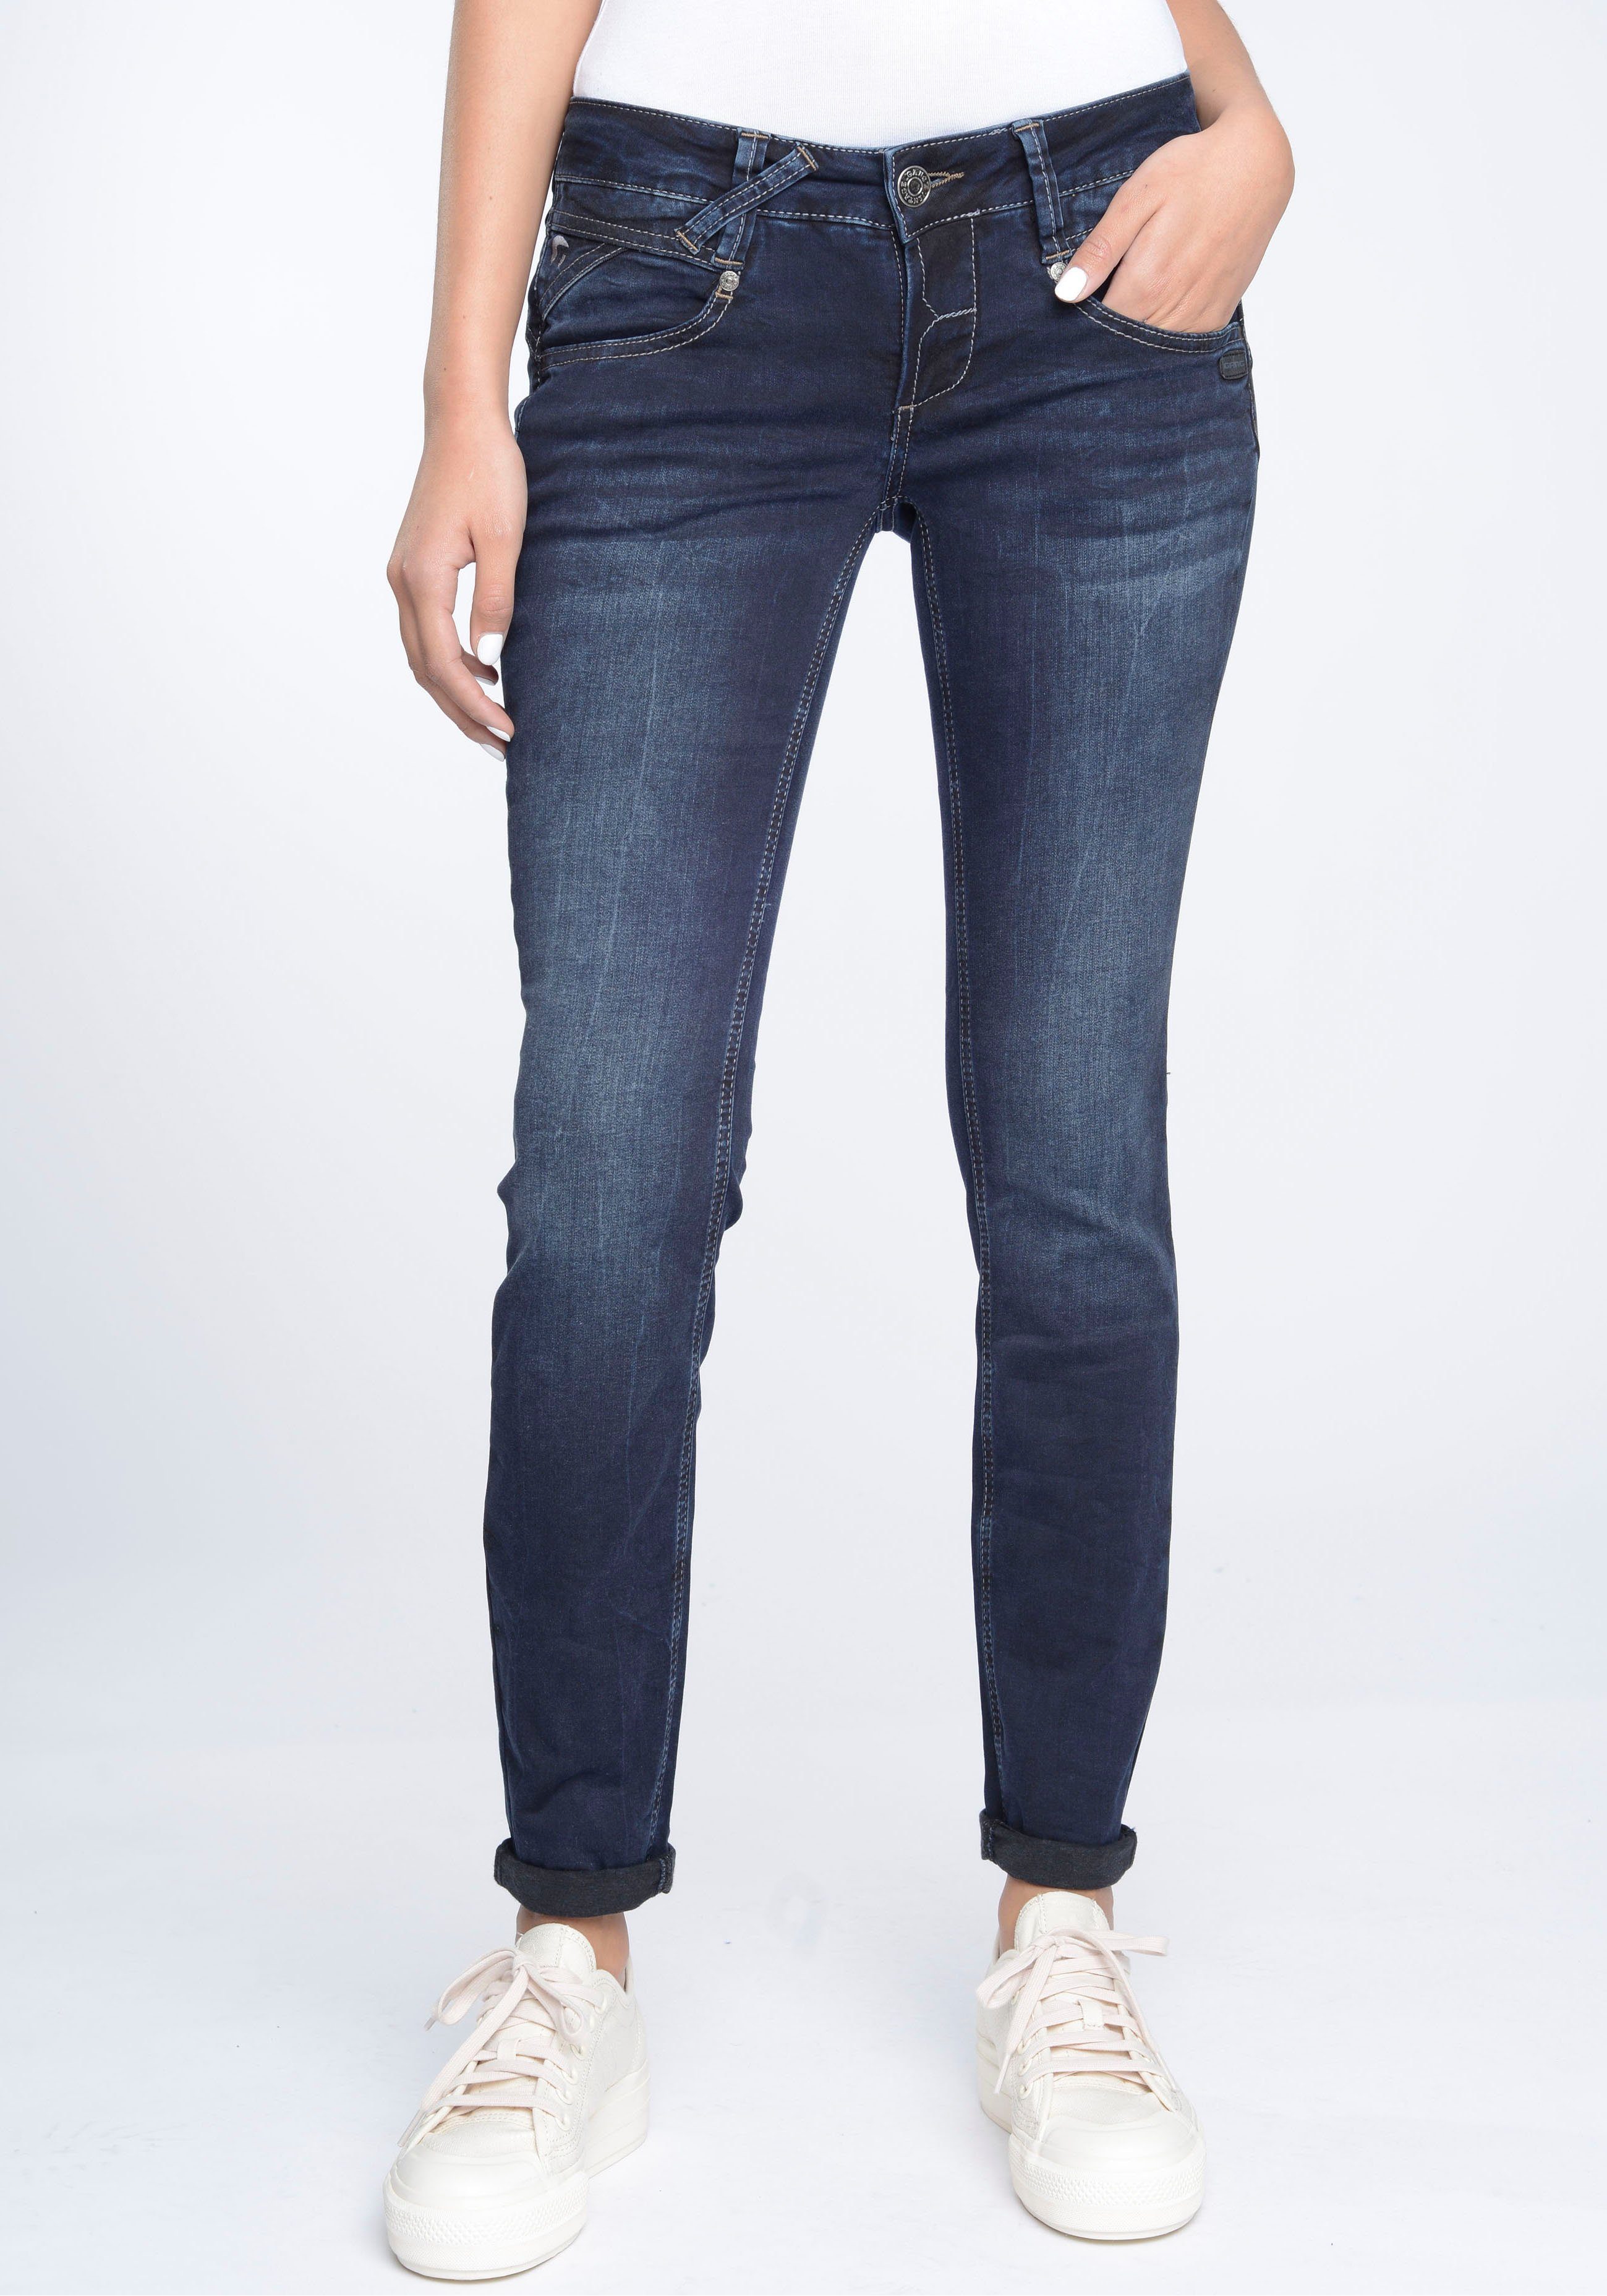 GANG Skinny-fit-Jeans 94Nena in authenischer Used-Waschung dark used | Stretchjeans